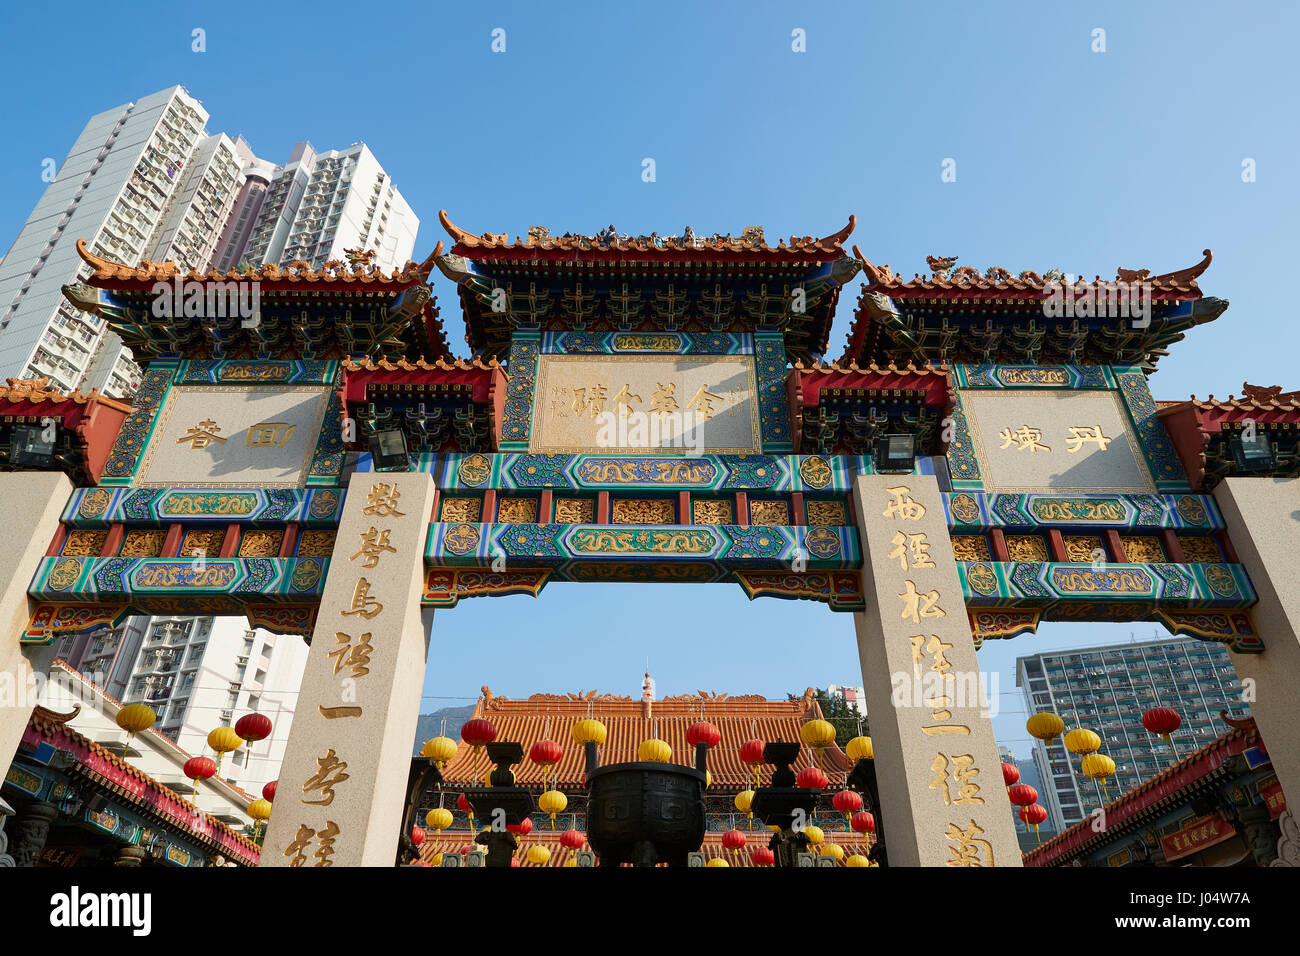 Ornate Traditional Chinese Gateway To The Wong Tai Sin Temple, Hong Kong. Stock Photo